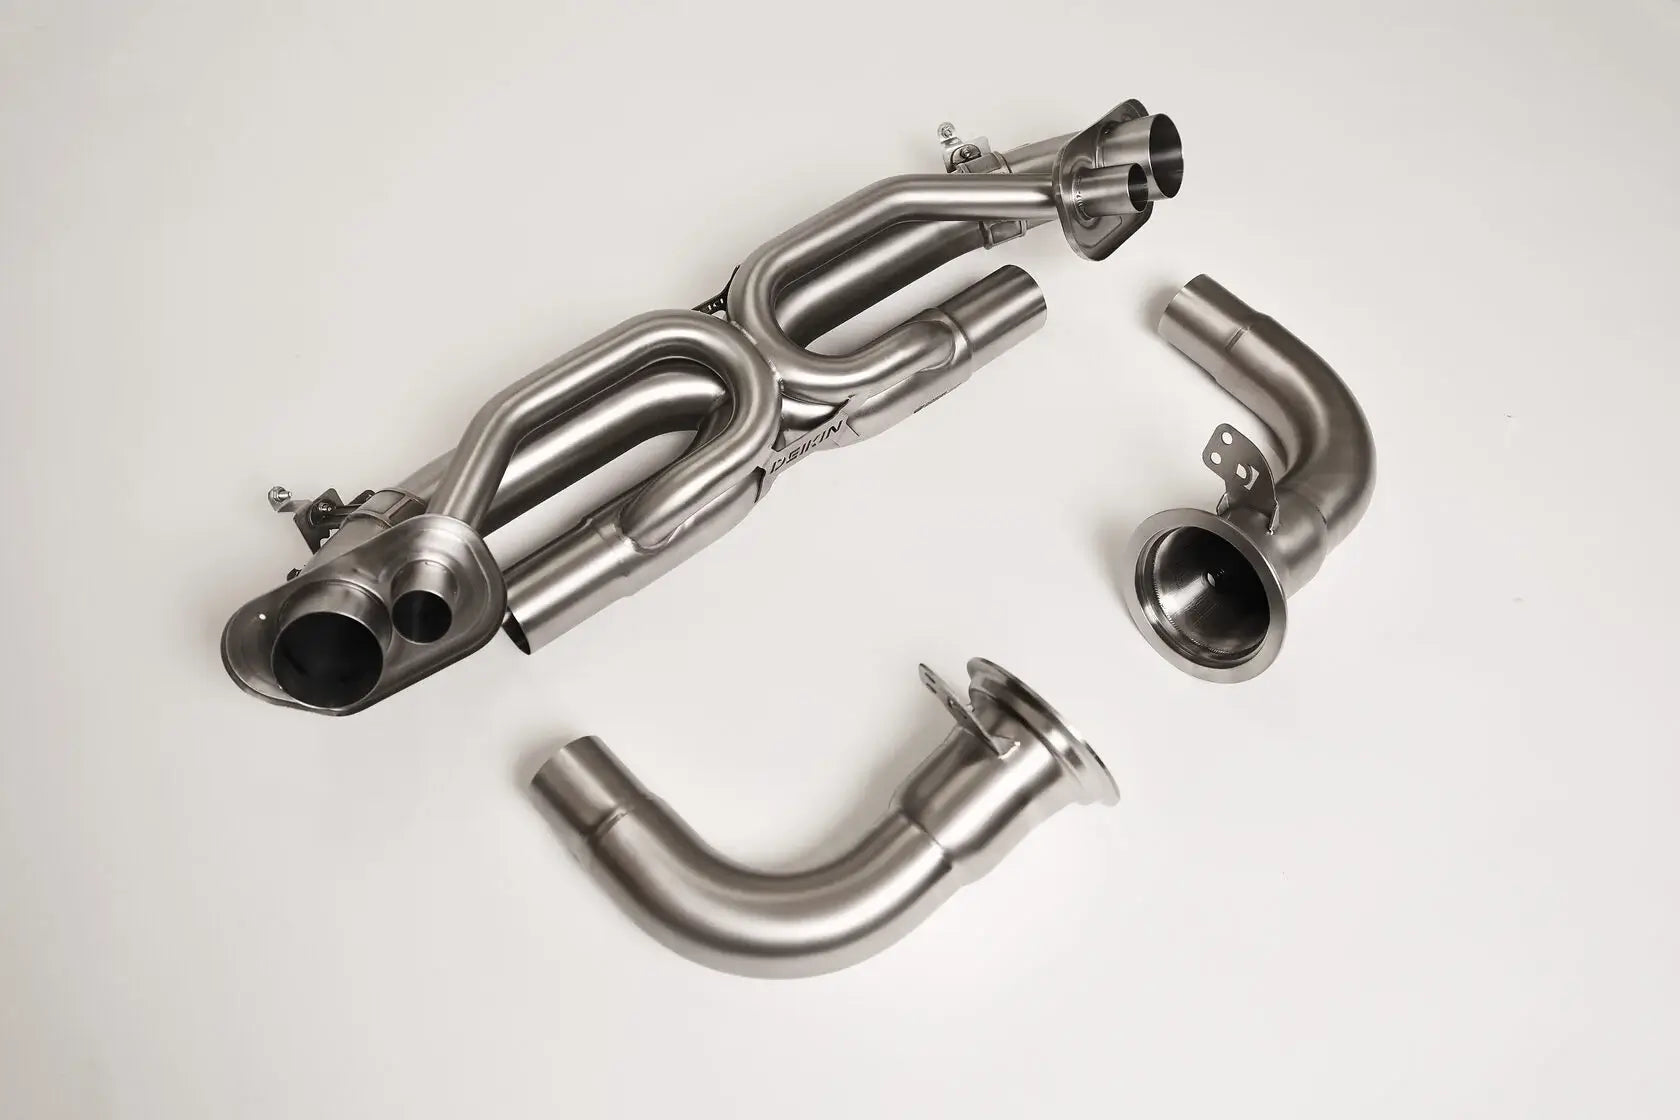 DEIKIN 10-PO.911.T/TS.992.R-ES-DP-Ti-00 Exhaust system "Race" Titan for Porsche 911 Turbo/Turbo S (992) complete with downpipes without HeatShield Photo-3 